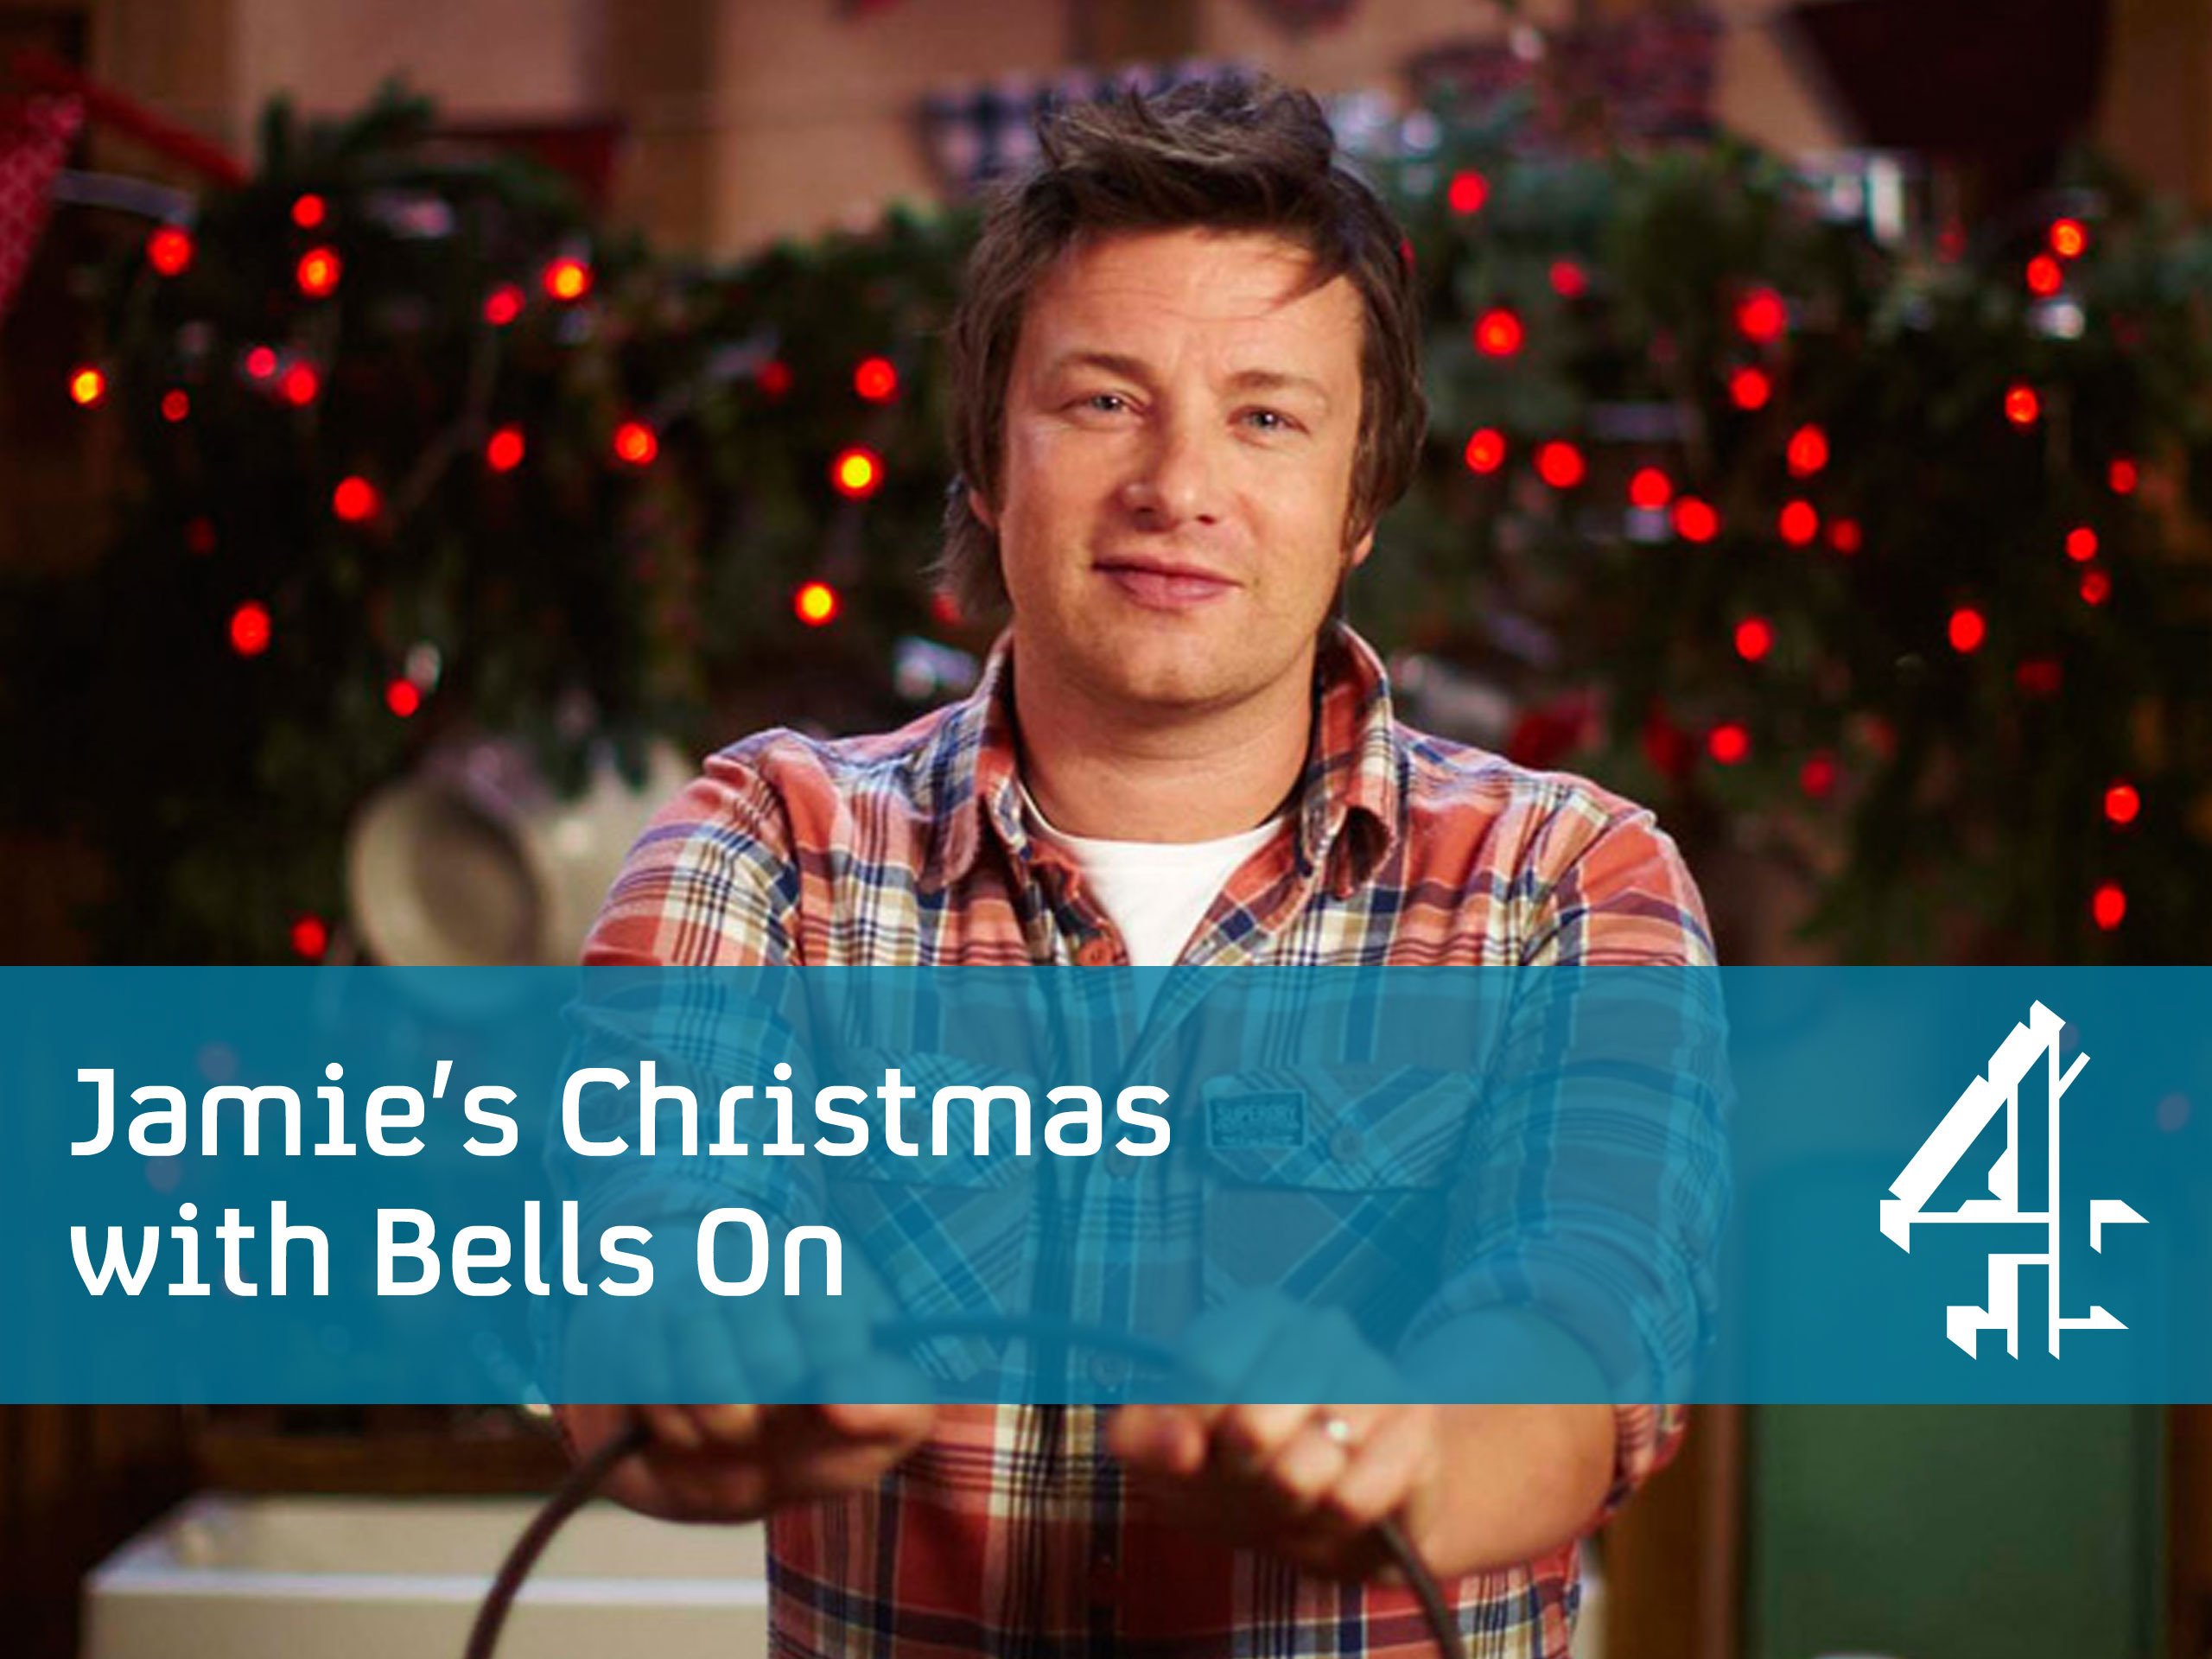 Jamie's Christmas with bells on